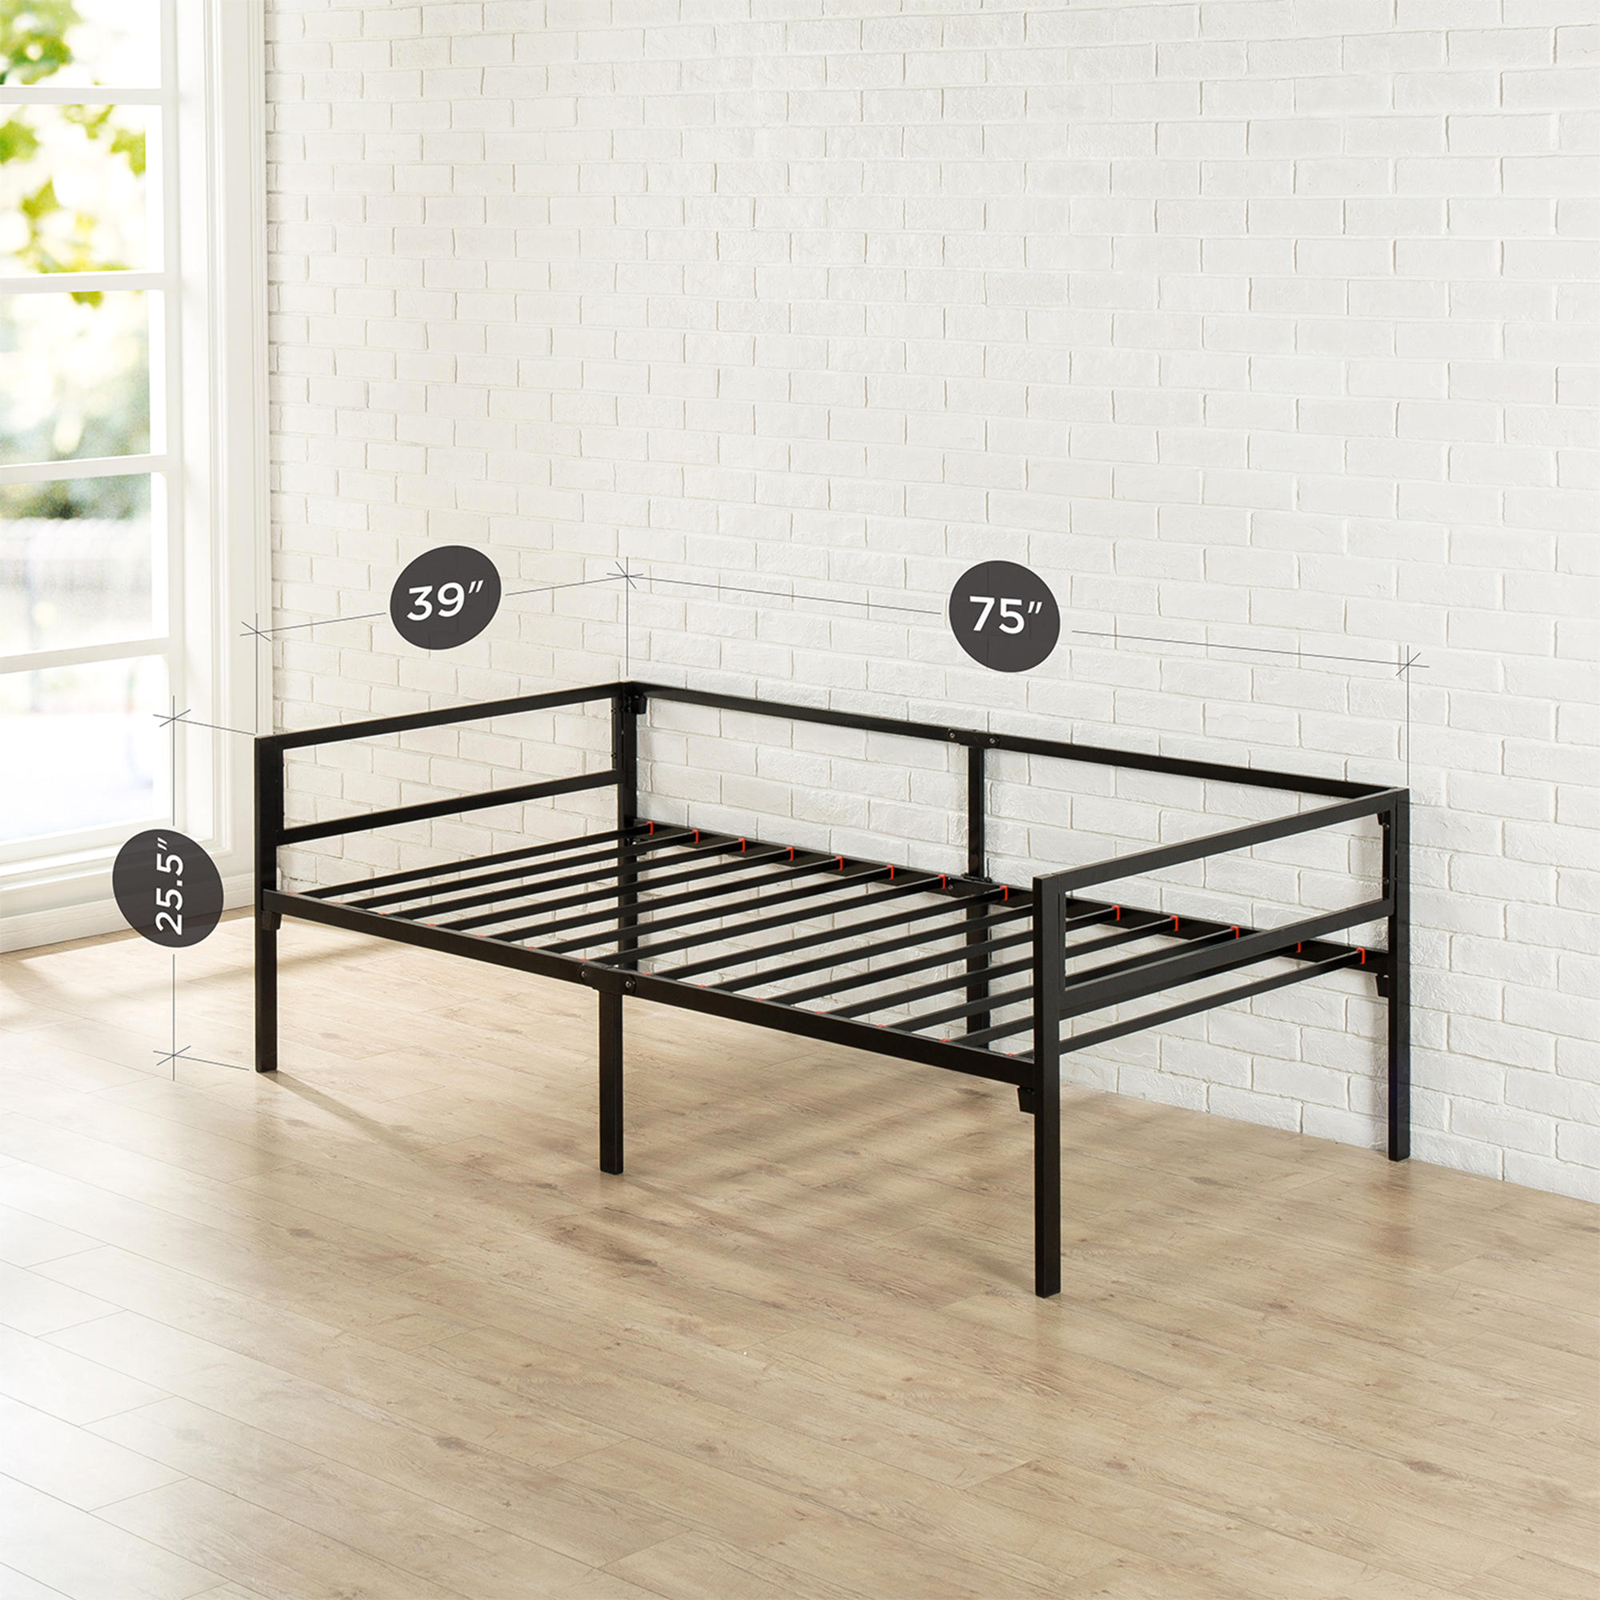 Zinus Twin Daybed Frame Sears Marketplace, Daybed Frame Parts